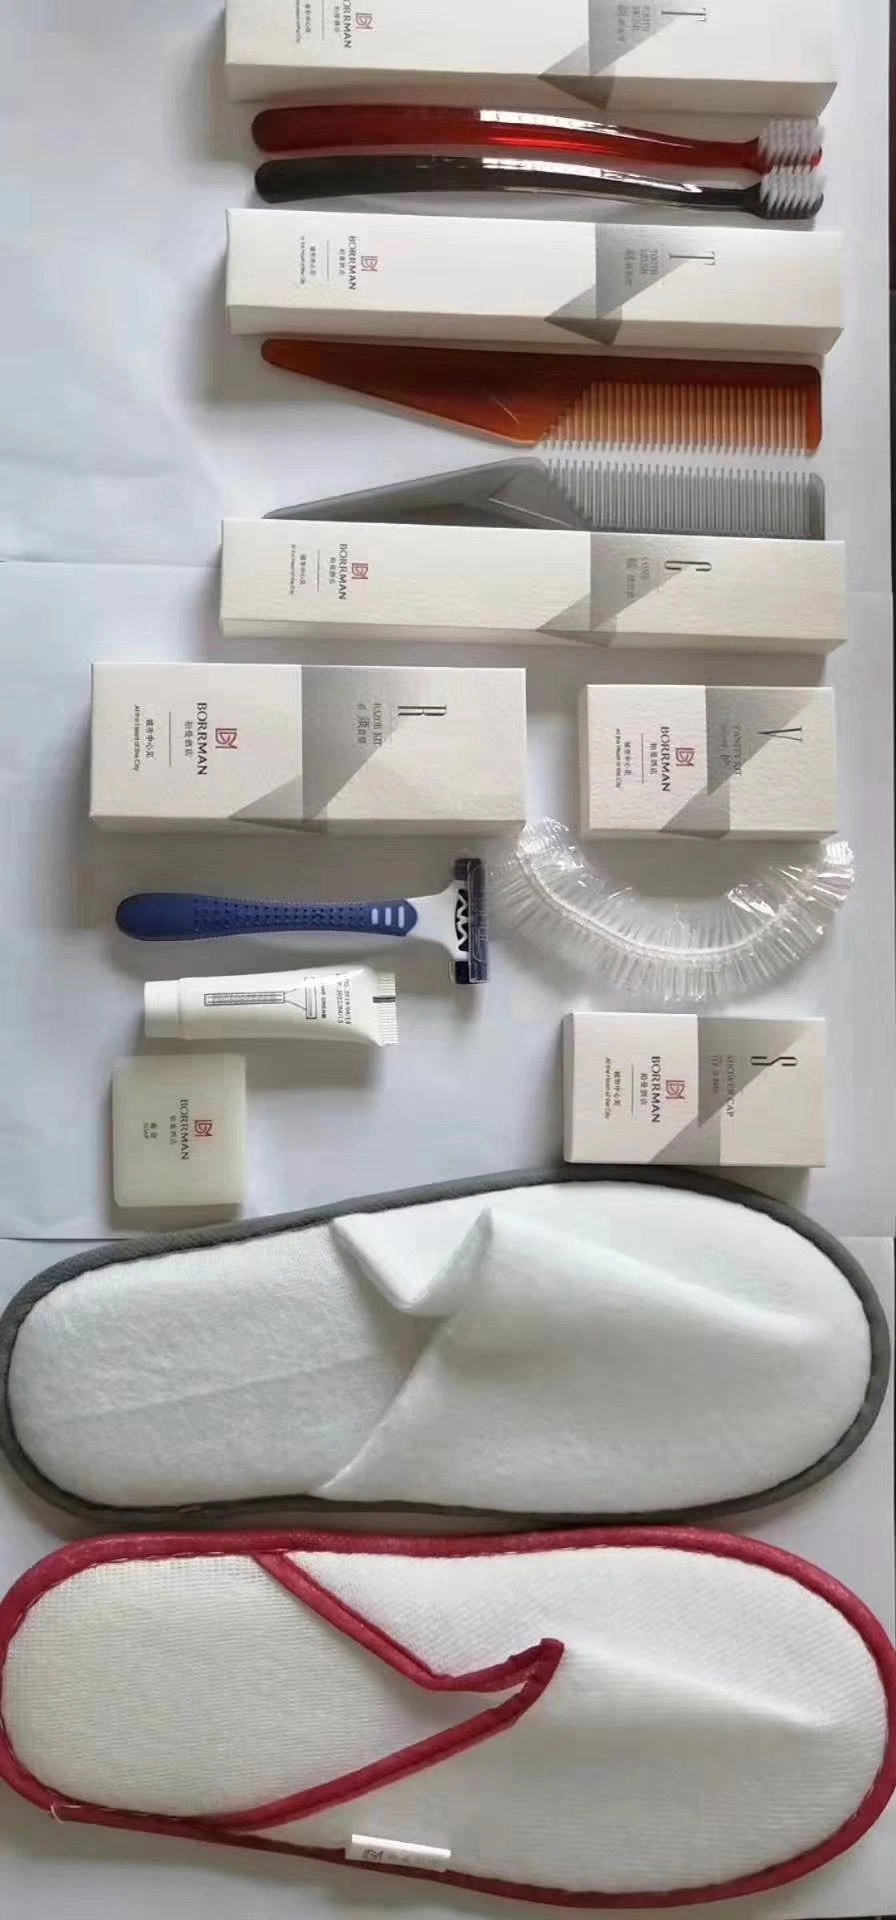 Hotel Amenities Set in Box for Hotel Room Using